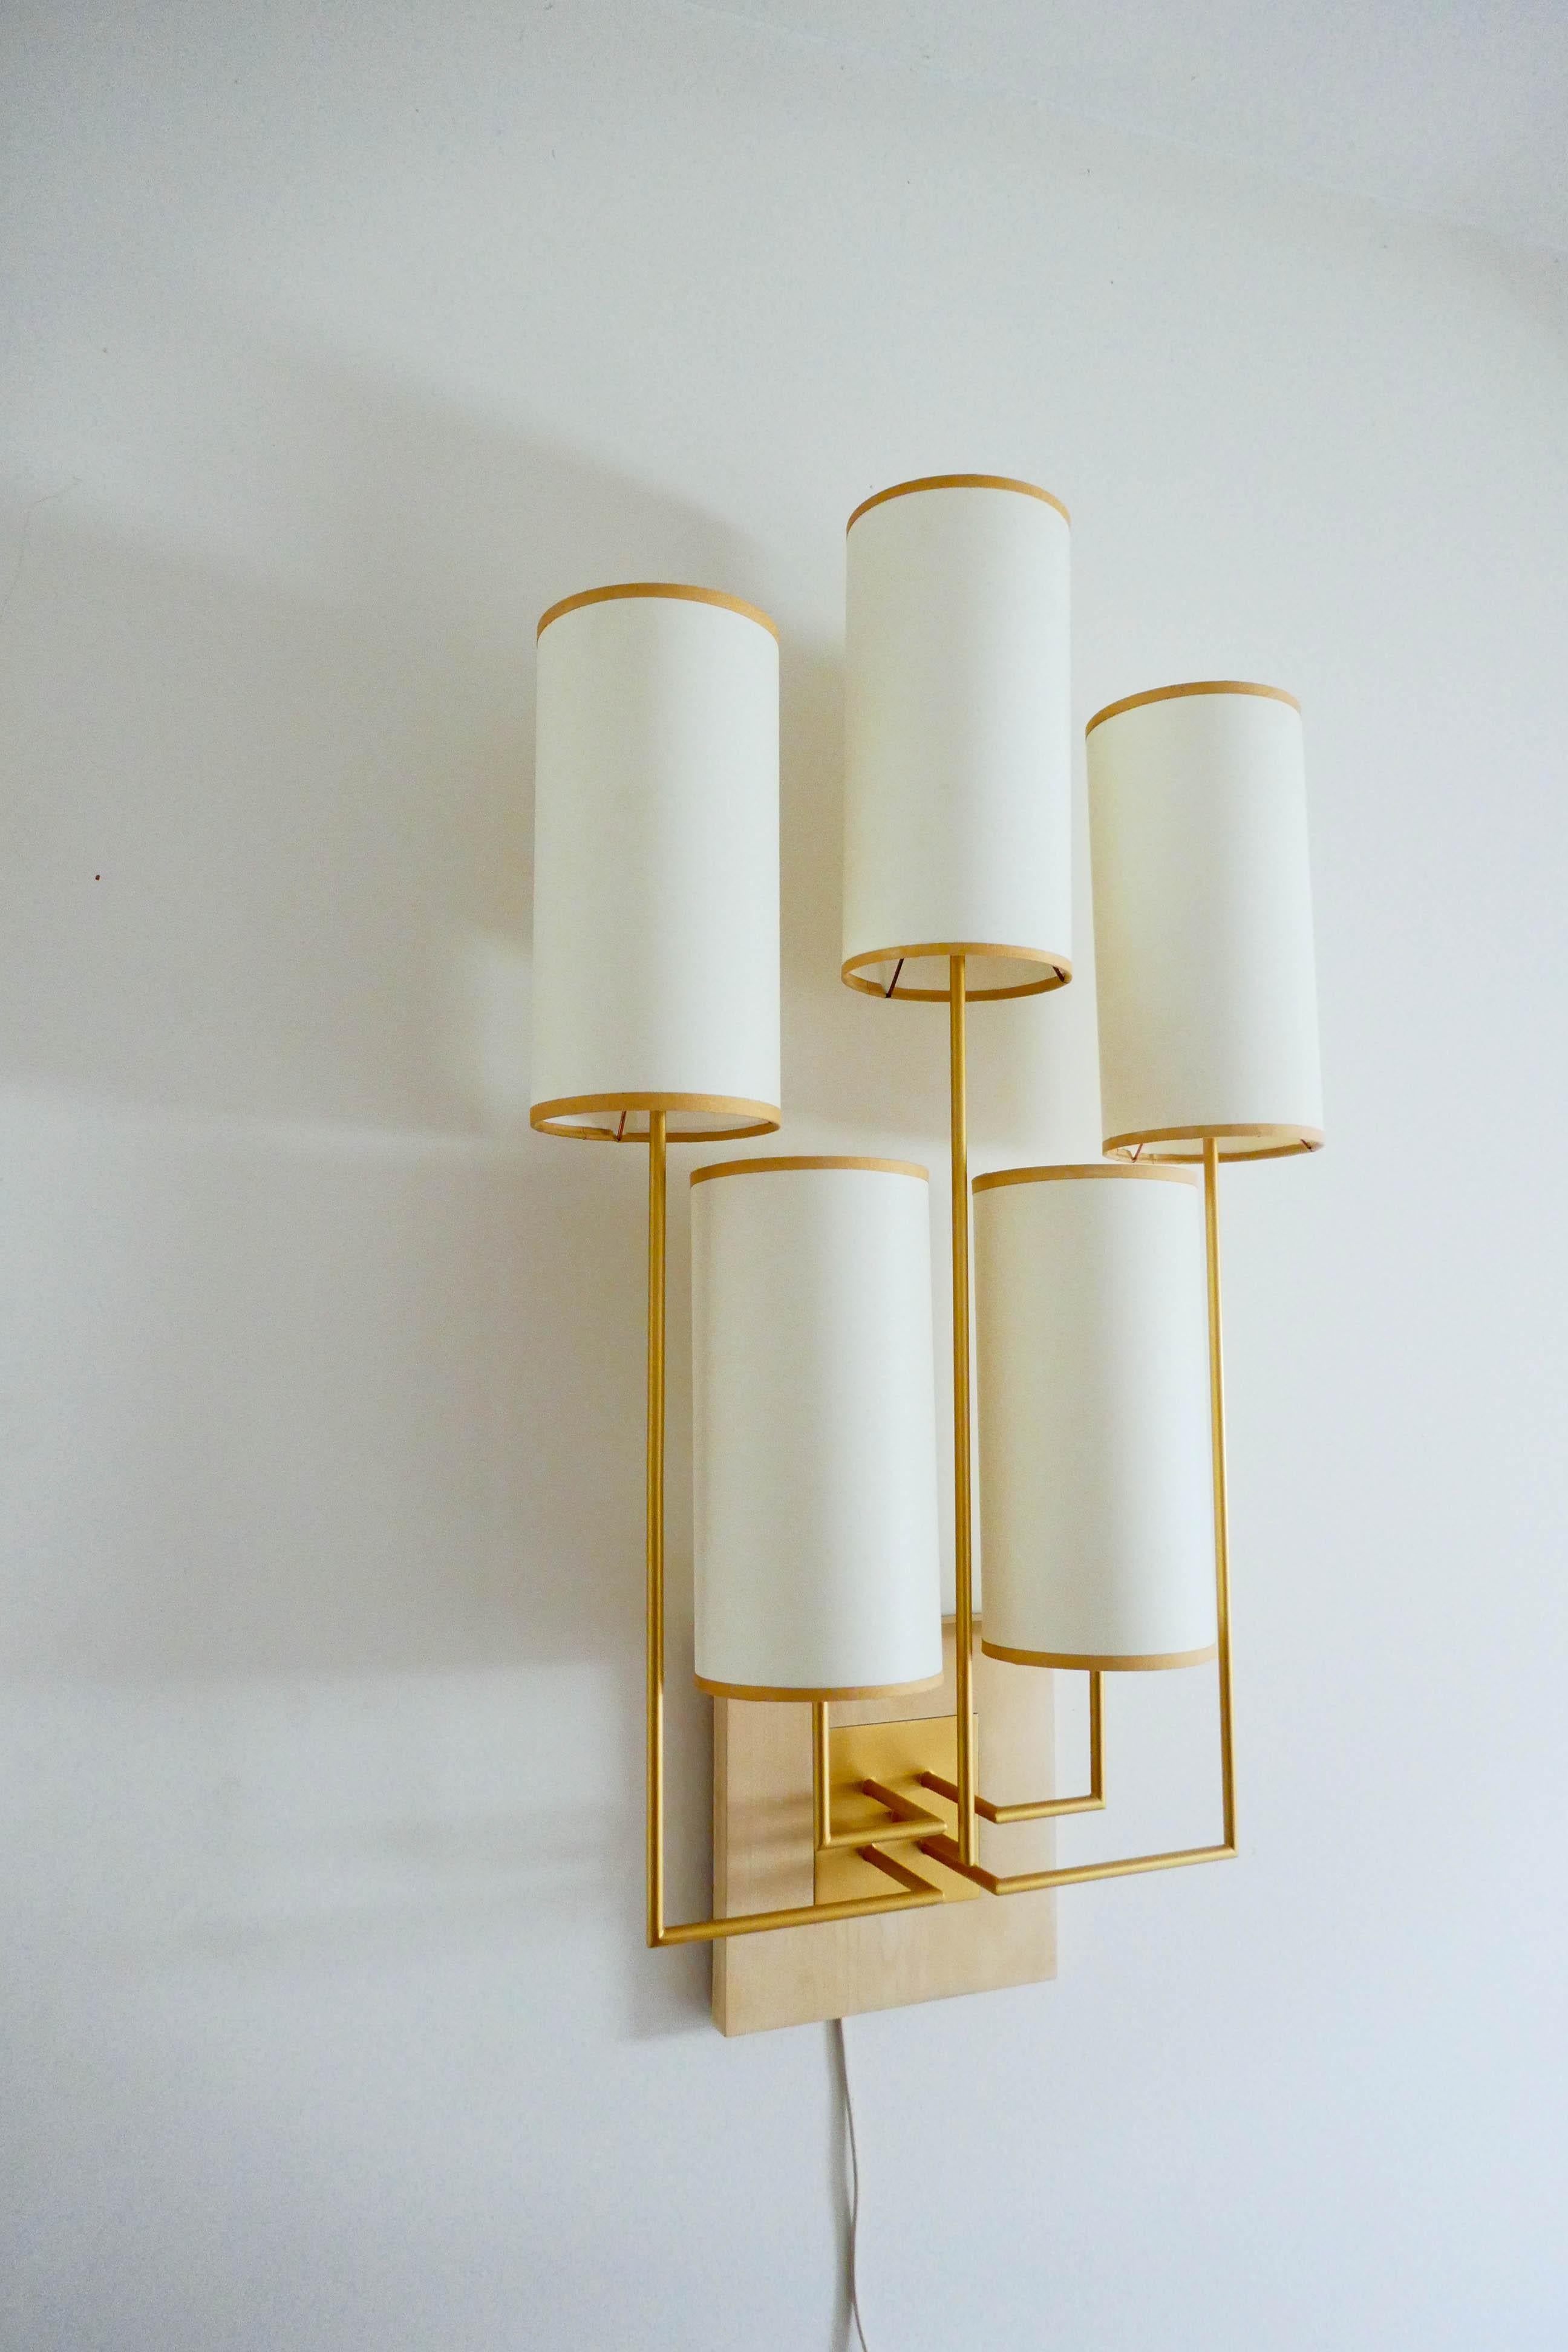 Pair of Wall Lamp Sconce in Gold Patina and White Fabric Lamp Shades For Sale 3